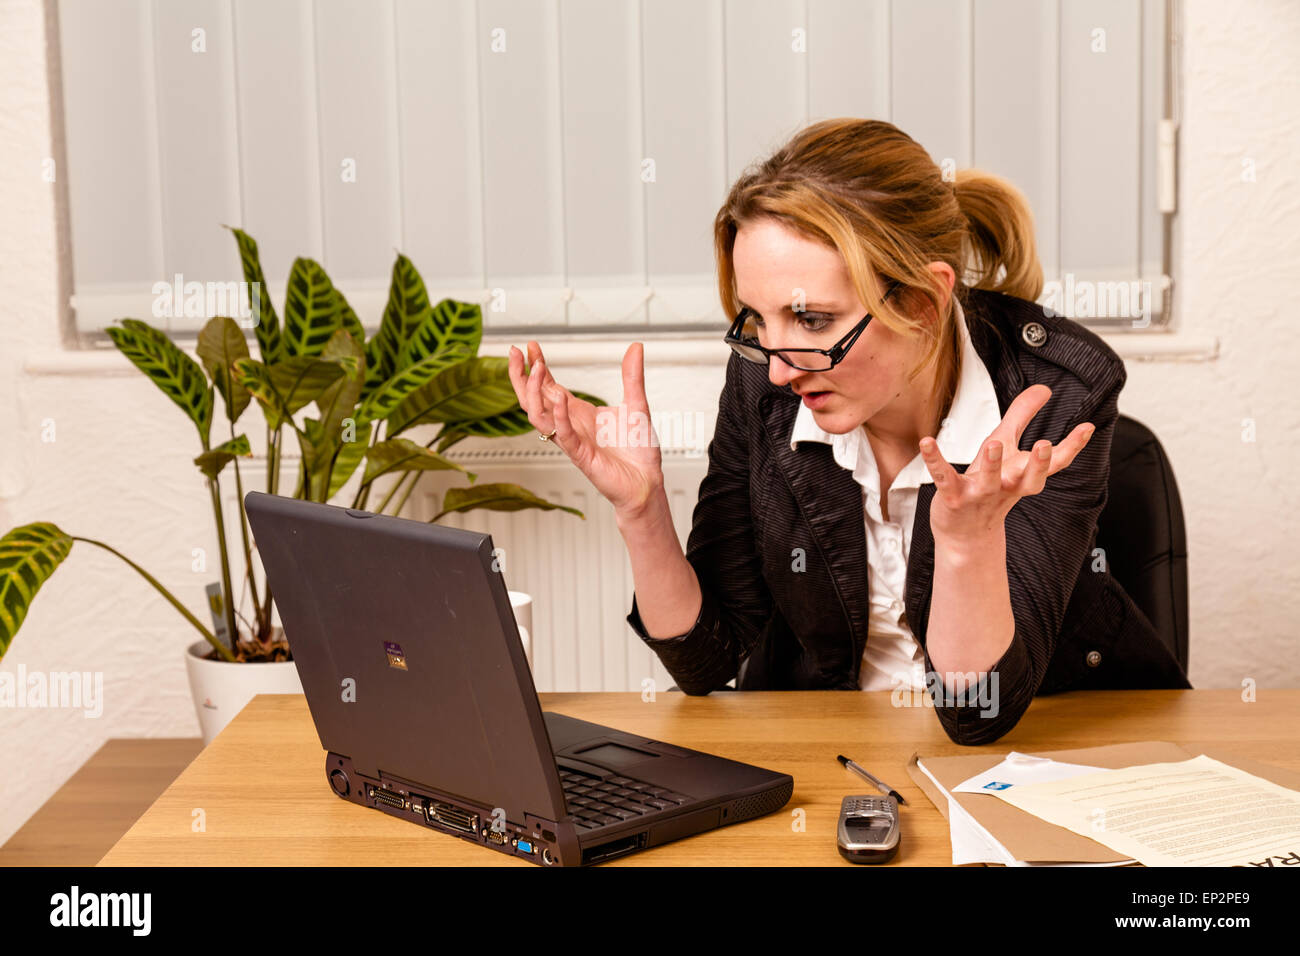 Young woman angry with her laptop Stock Photo